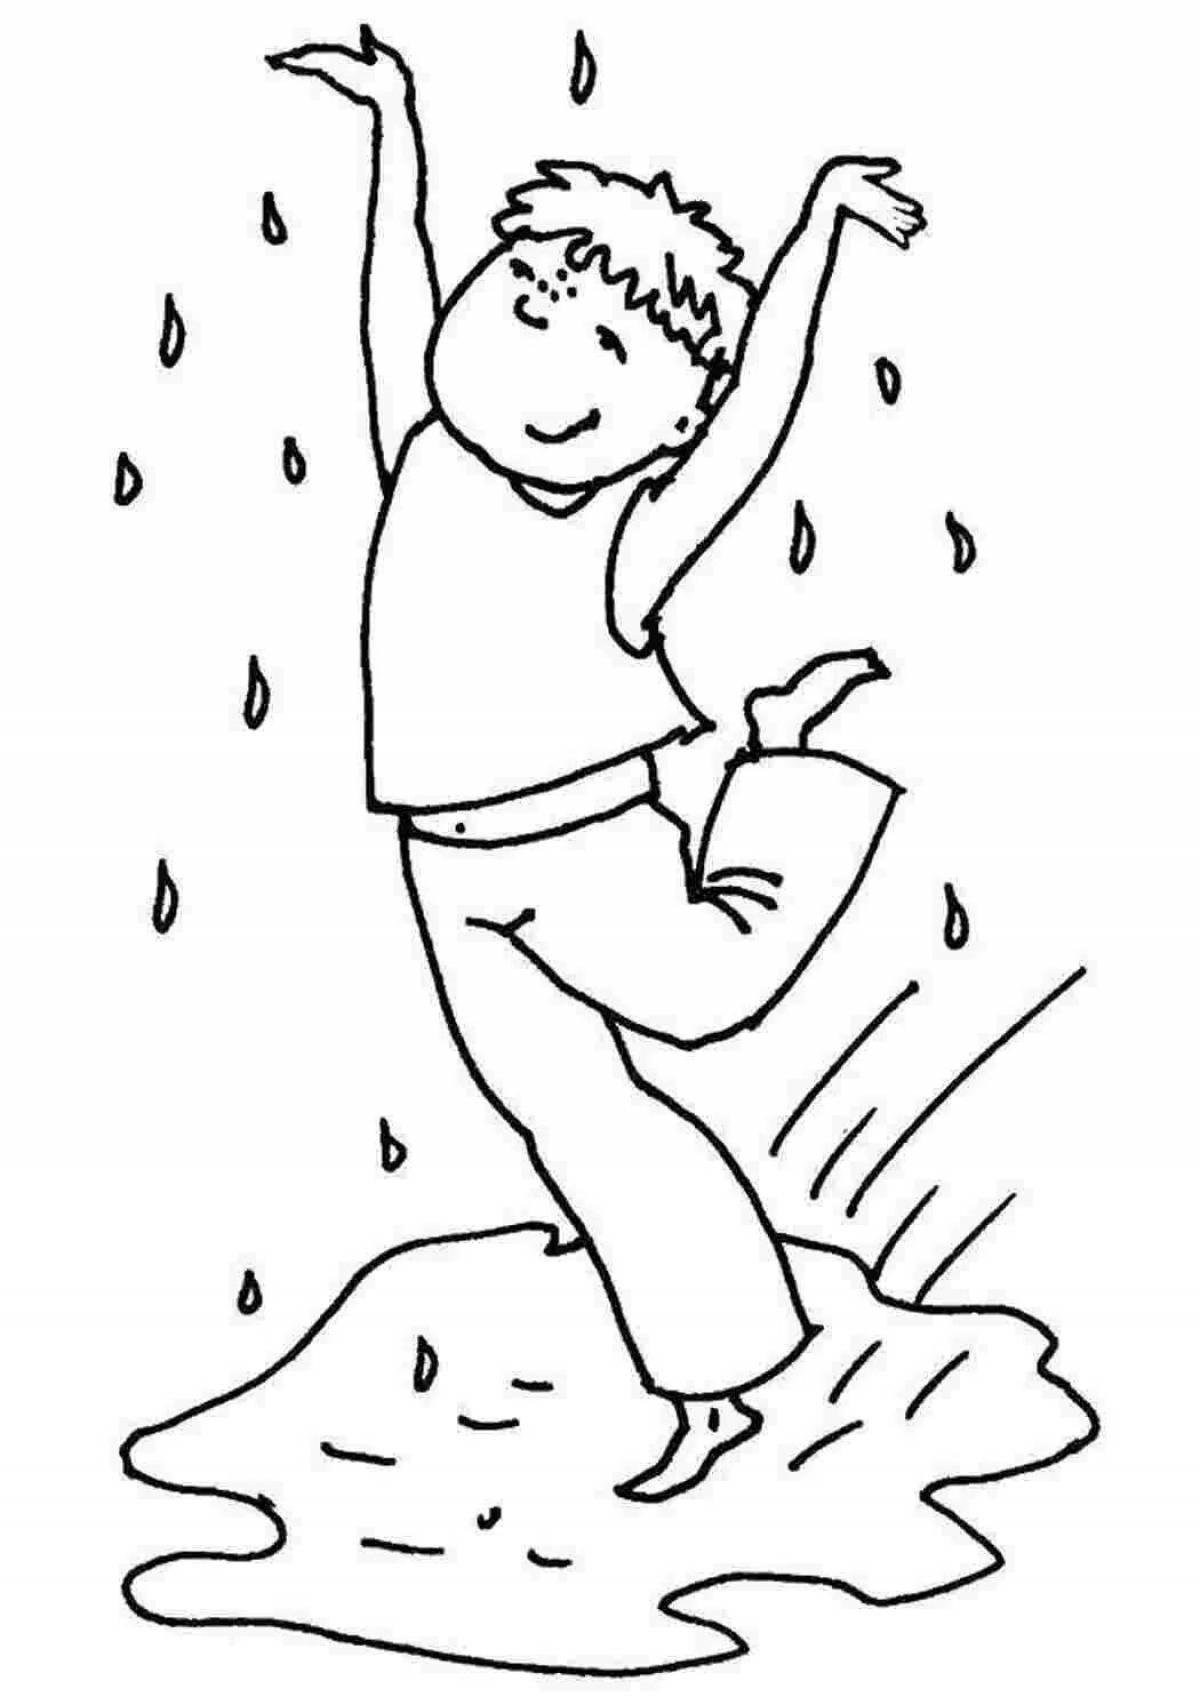 Sunny puddle coloring page